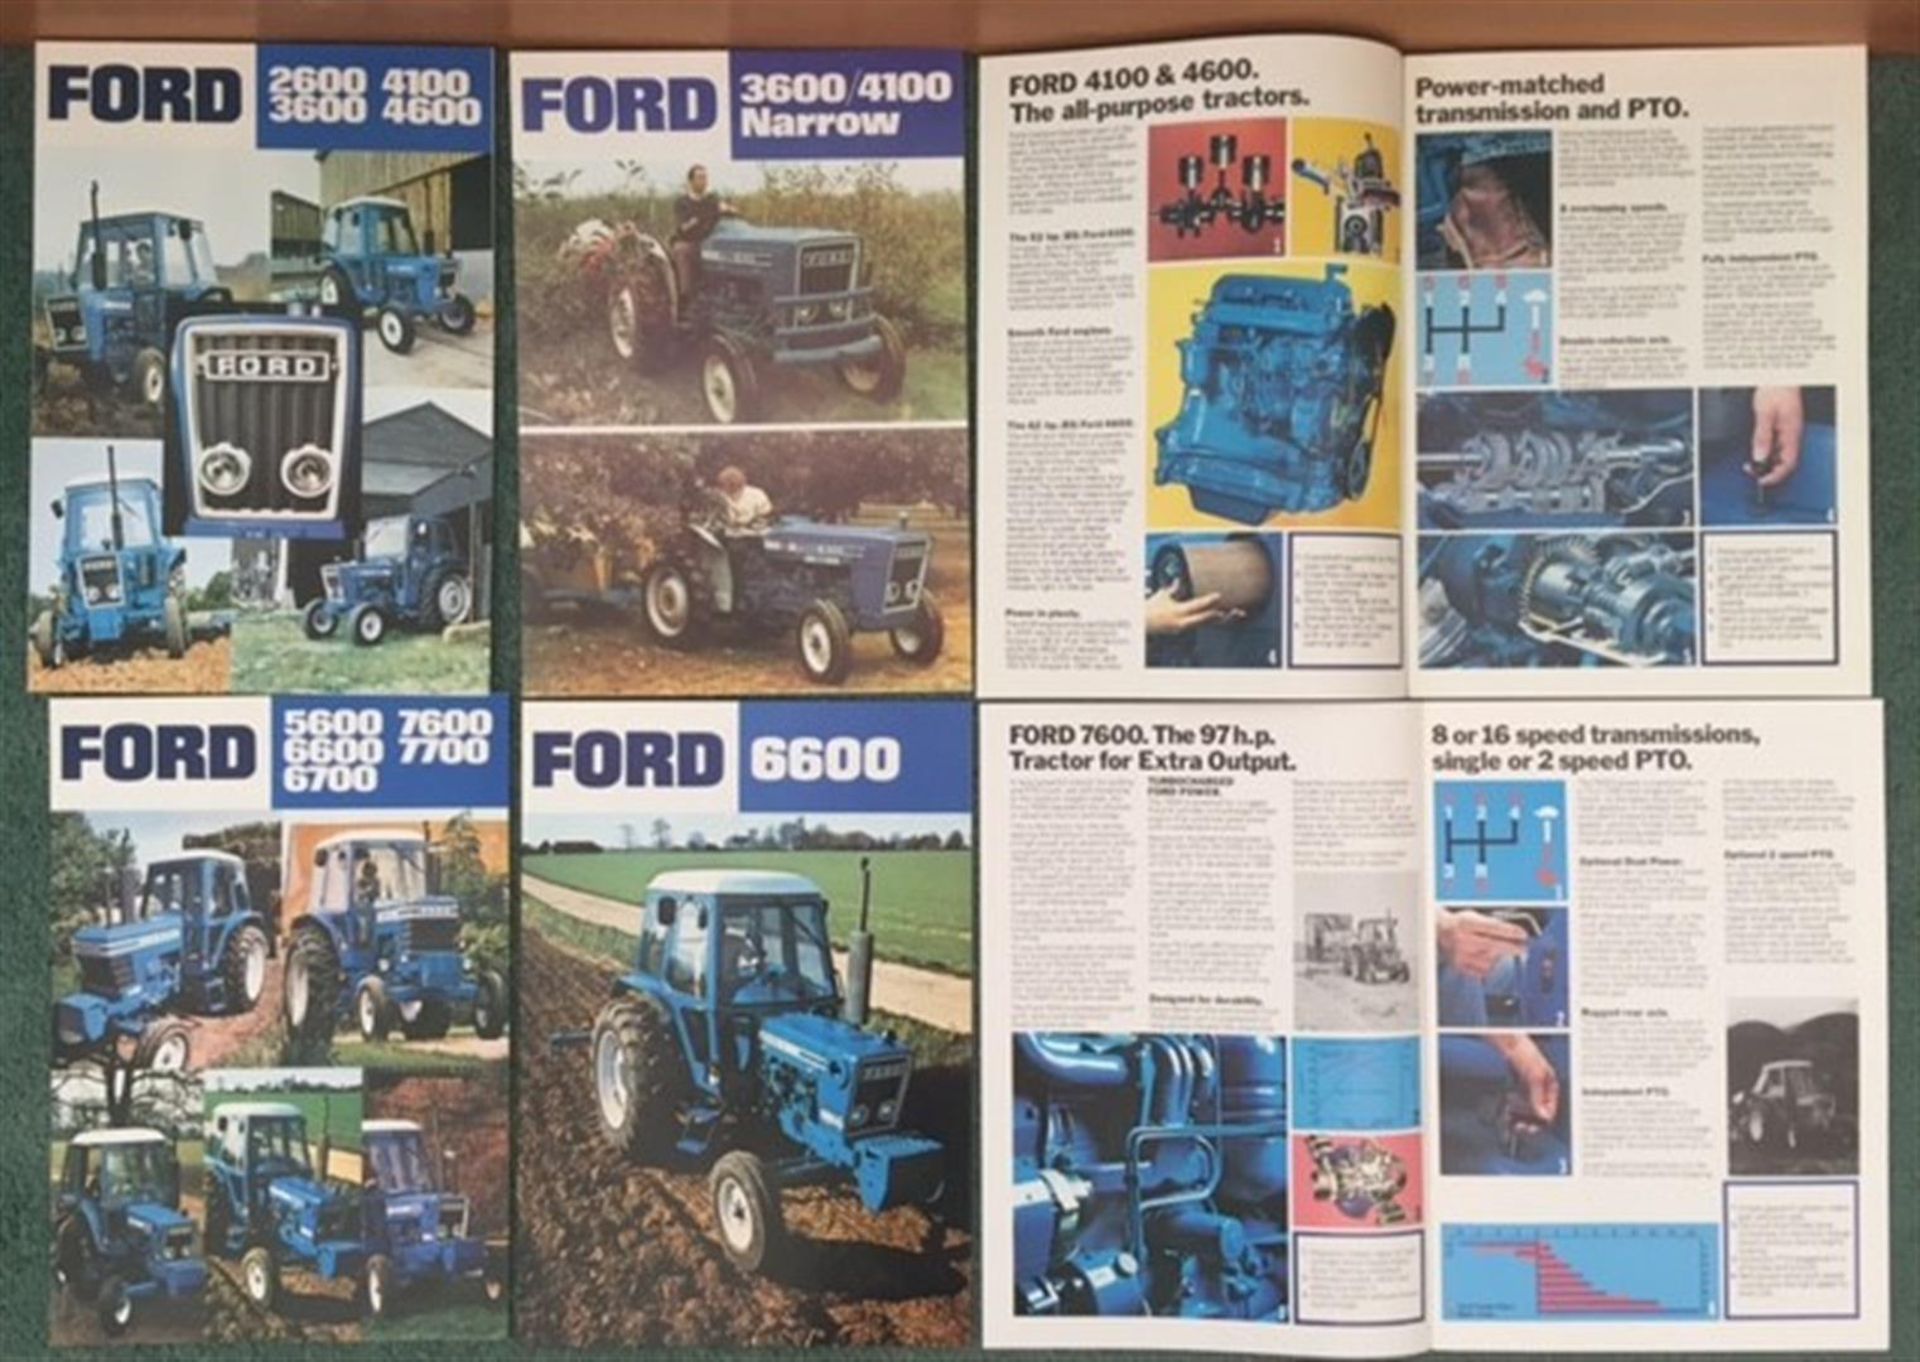 Ford tractor sales brochures 3600/4100 narrow, 4100, 4600, 6600, 7600, 5600/6600/6700/7600/7700 (6)